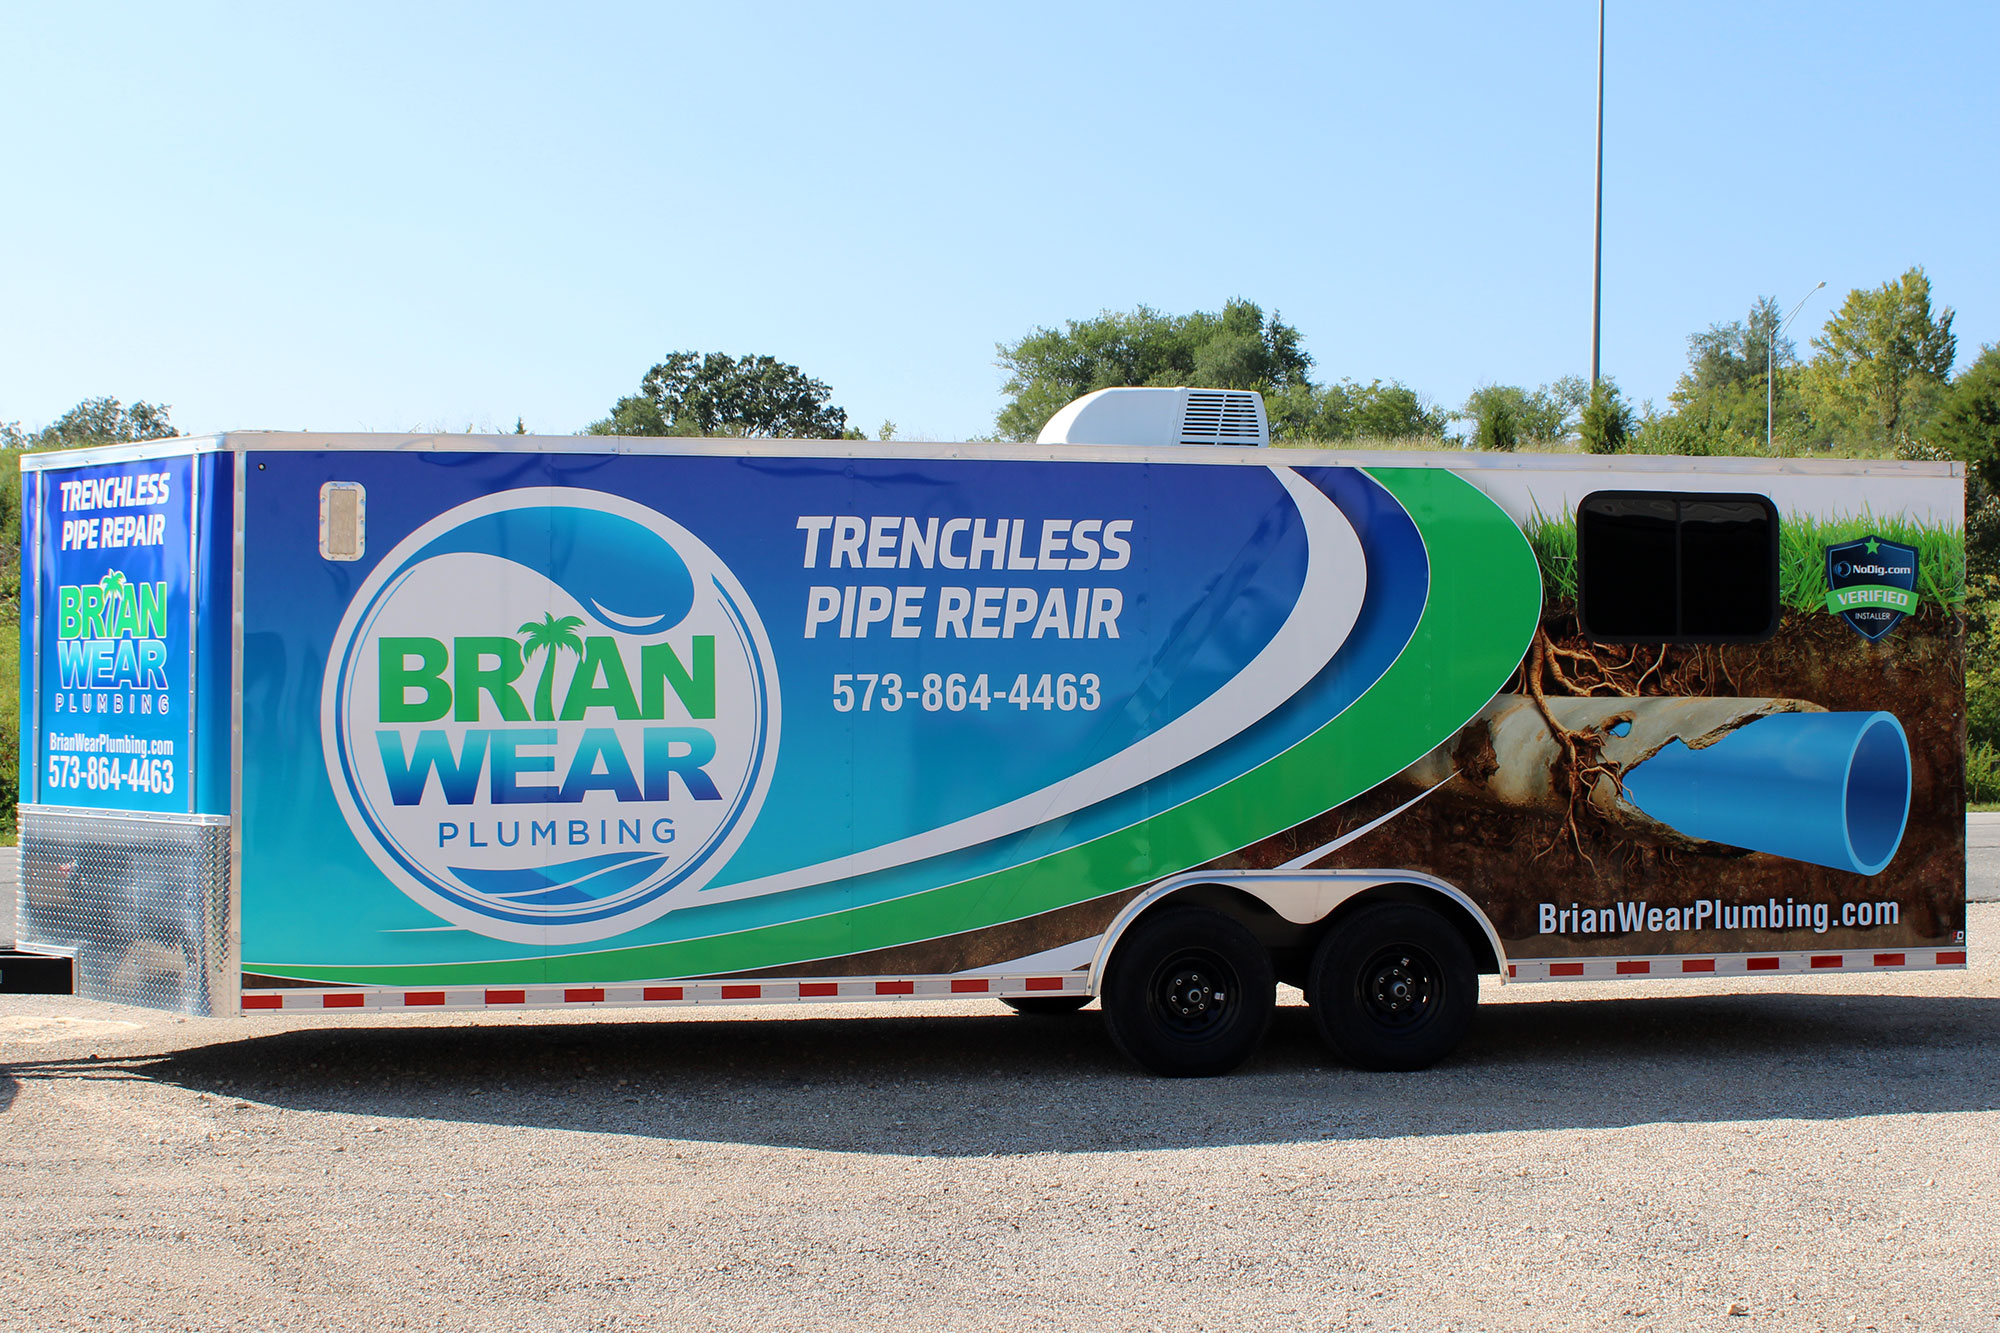 Trenchless Pipe Repair Cargo Trailer Graphics And Wraps Pro Dezigns Jefferson City Missouri